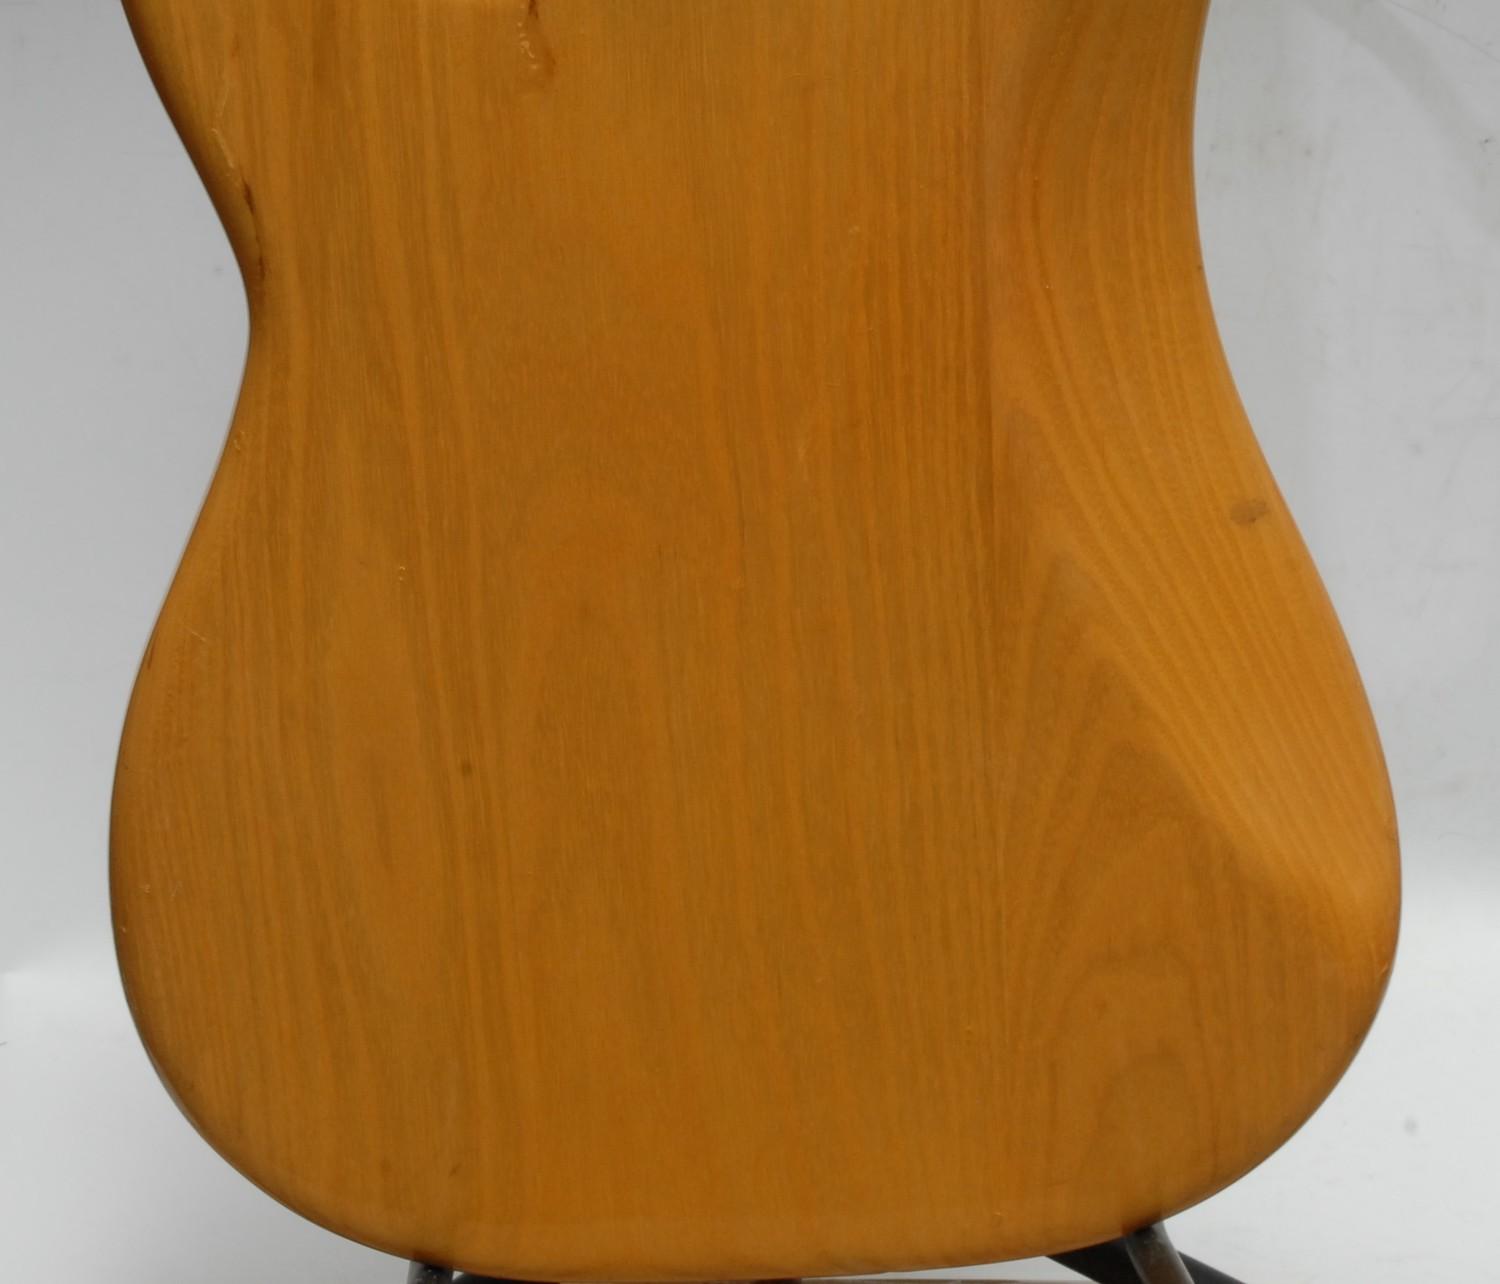 A Fender Precision electric bass guitar USA, natural wood body, maple neck, black pickguard. - Image 14 of 16